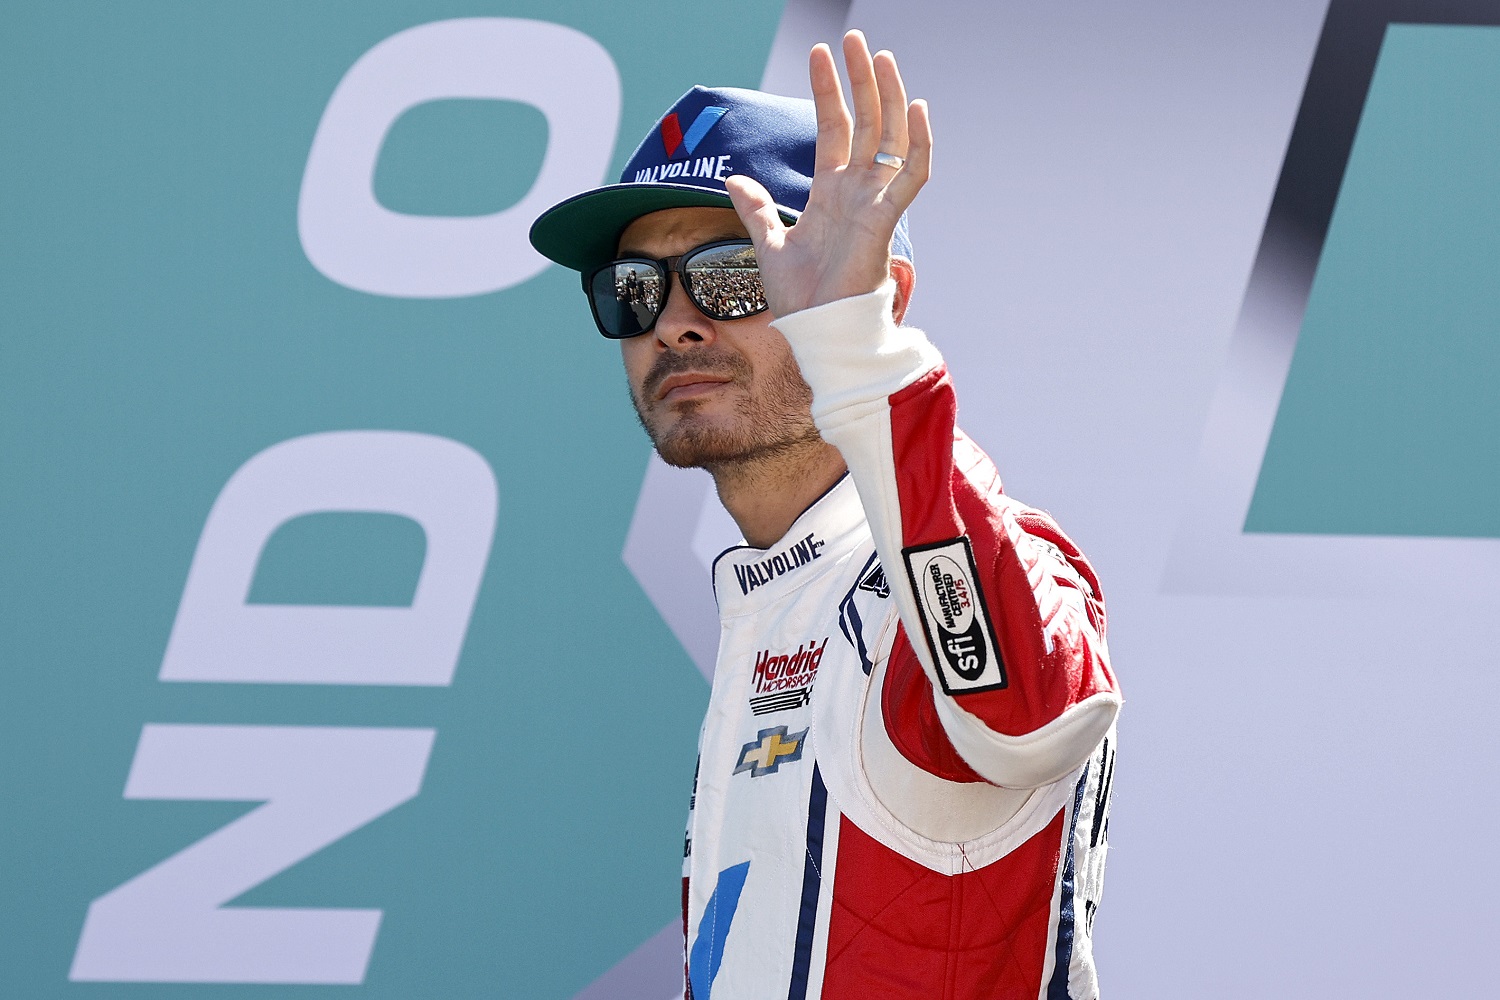 Kyle Larson waves to fans as he walks onstage during driver intros to the NASCAR Cup Series Dixie Vodka 400 at Homestead-Miami Speedway on Oct. 23, 2022 in Homestead, Florida. | Sean Gardner/Getty Images